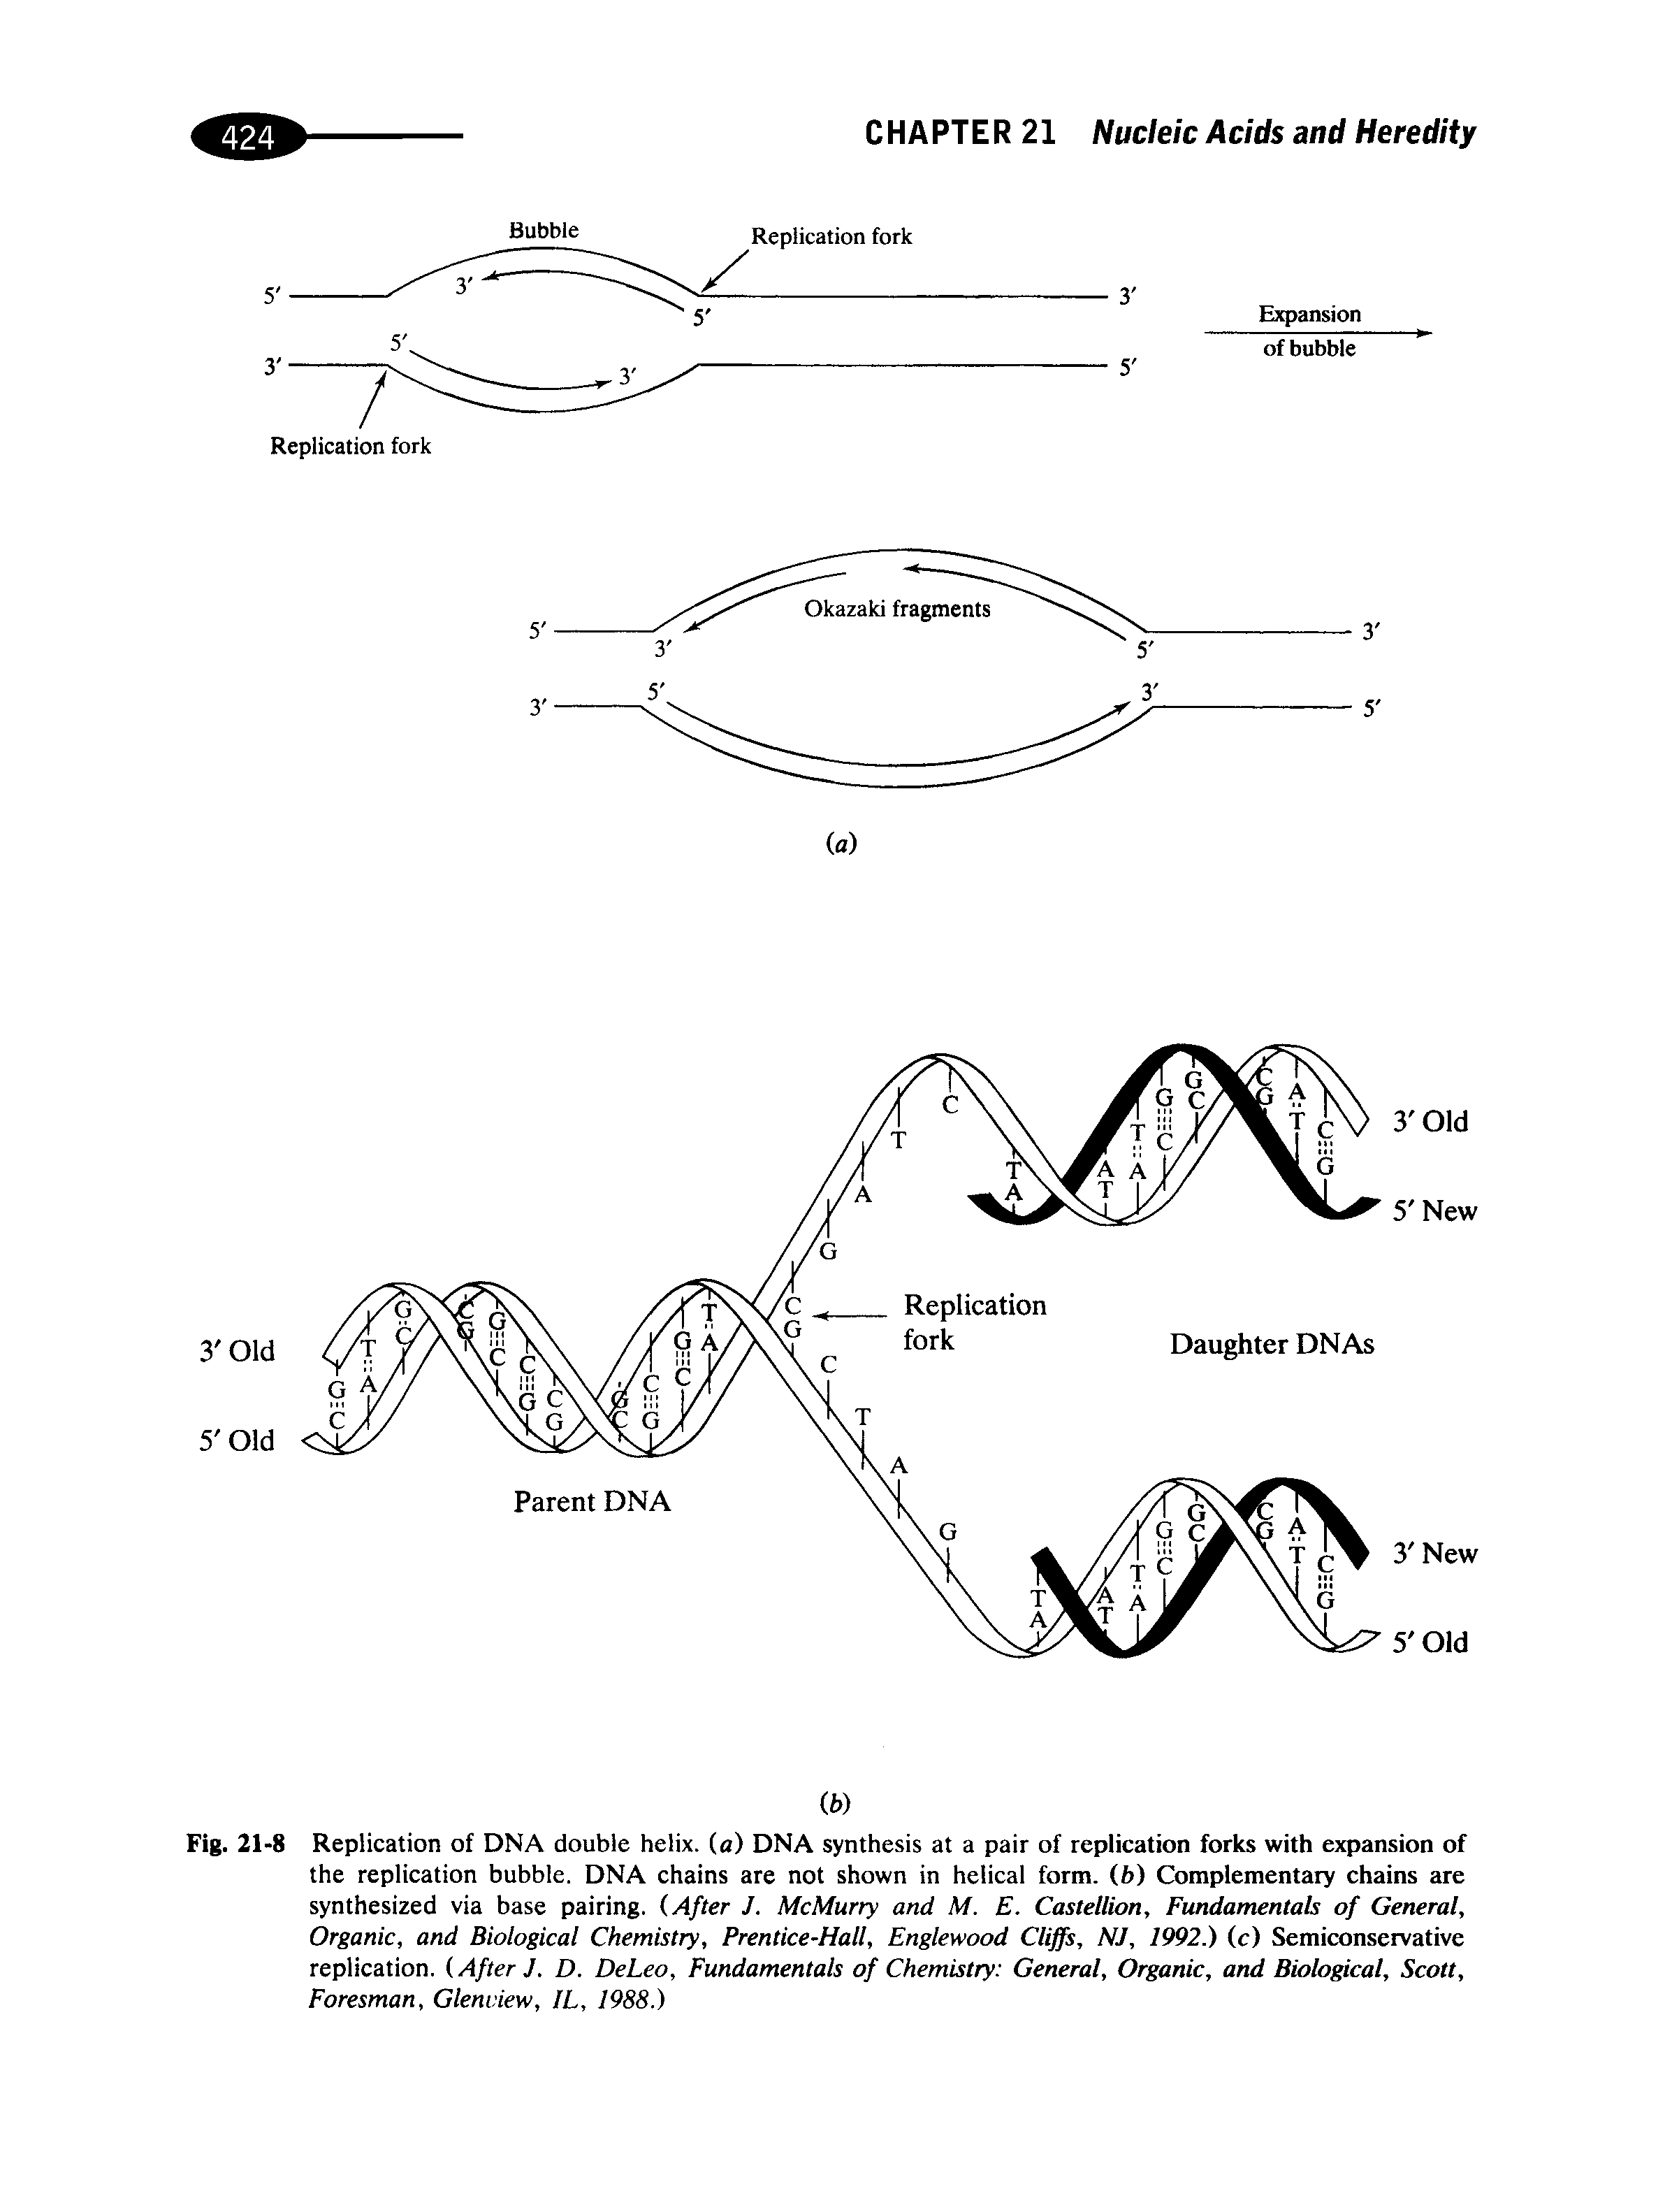 Fig. 21-8 Replication of DNA double helix, (a) DNA synthesis at a pair of replication forks with expansion of the replication bubble. DNA chains are not shown in helical form, (ft) Complementary chains are synthesized via base pairing. (After J. McMurry and M. E. Castellion, Fundamentals of General, Organic, and Biological Chemistry, Prentice-Hall, Englewood Cliffs, NJ, 1992.) (c) Semiconservative replication. (After J. D. DeLeo, Fundamentals of Chemistry General, Organic, and Biological, Scott, Foresman, Glenview, IL, 1988.)...